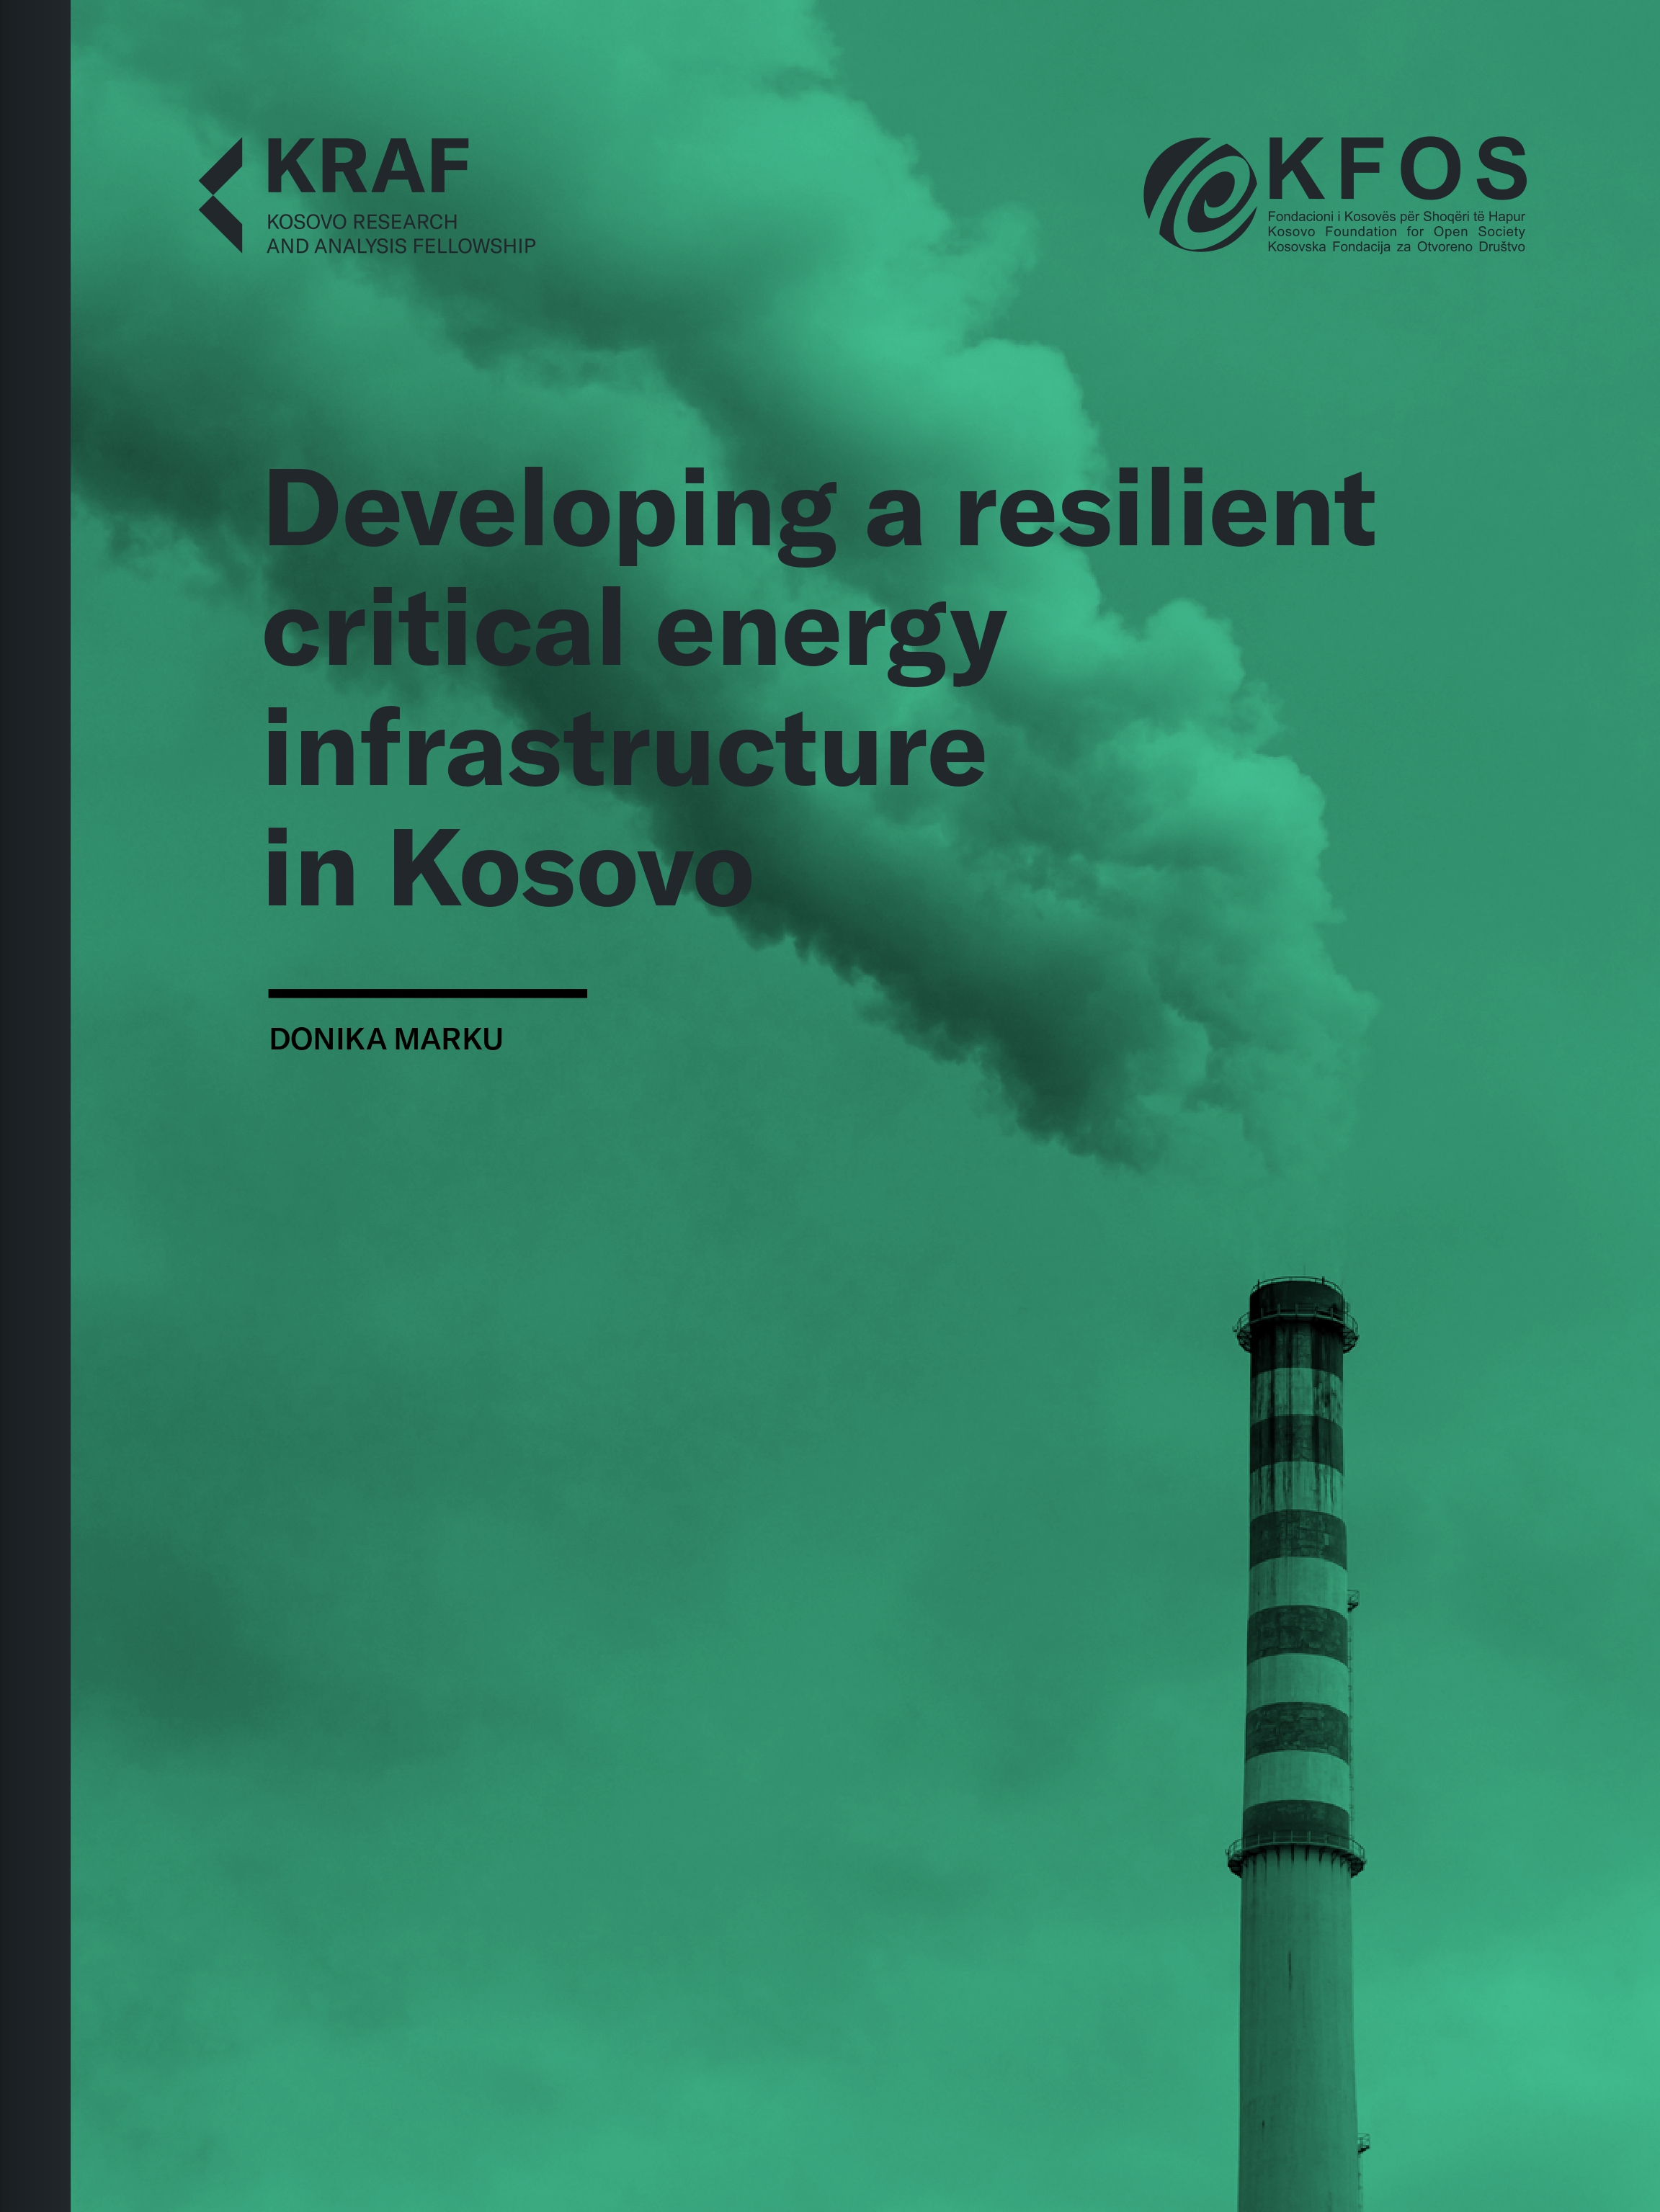 Developing a resilient critical energy infrastructure in Kosovo